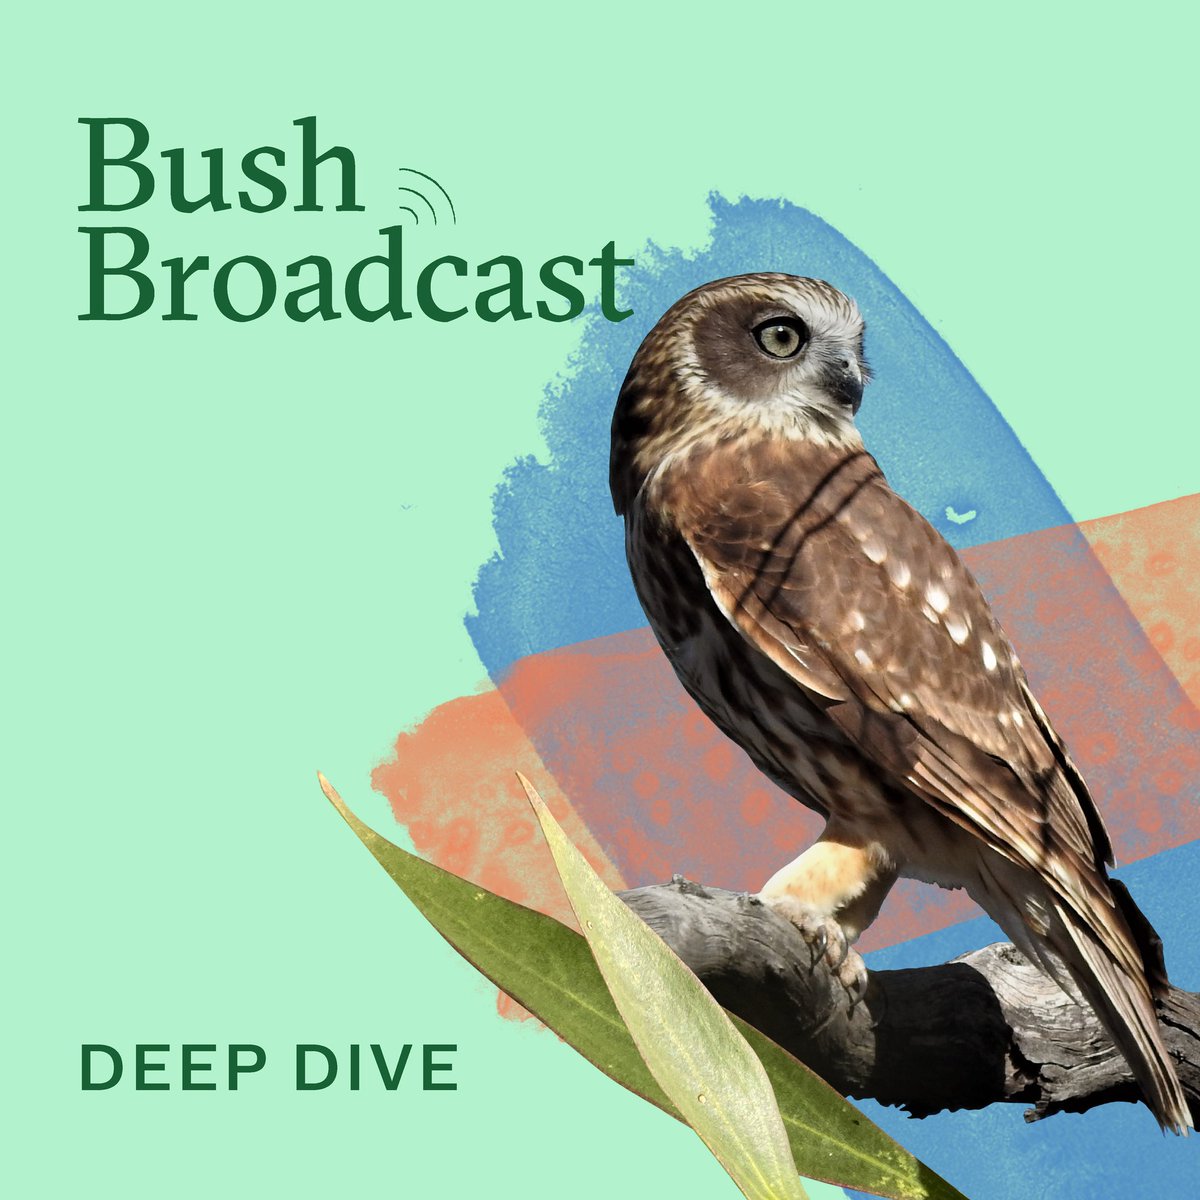 Did you miss out on our very first Bush Broadcast 'Deep Dive' webinar? 

Don't worry, you can still catch up on this captivating conversation here 👉 youtube.com/watch?v=eBBpFj…

#bushbroadcast #deepdive #webinar #conservationcareers #Victorianwildlife